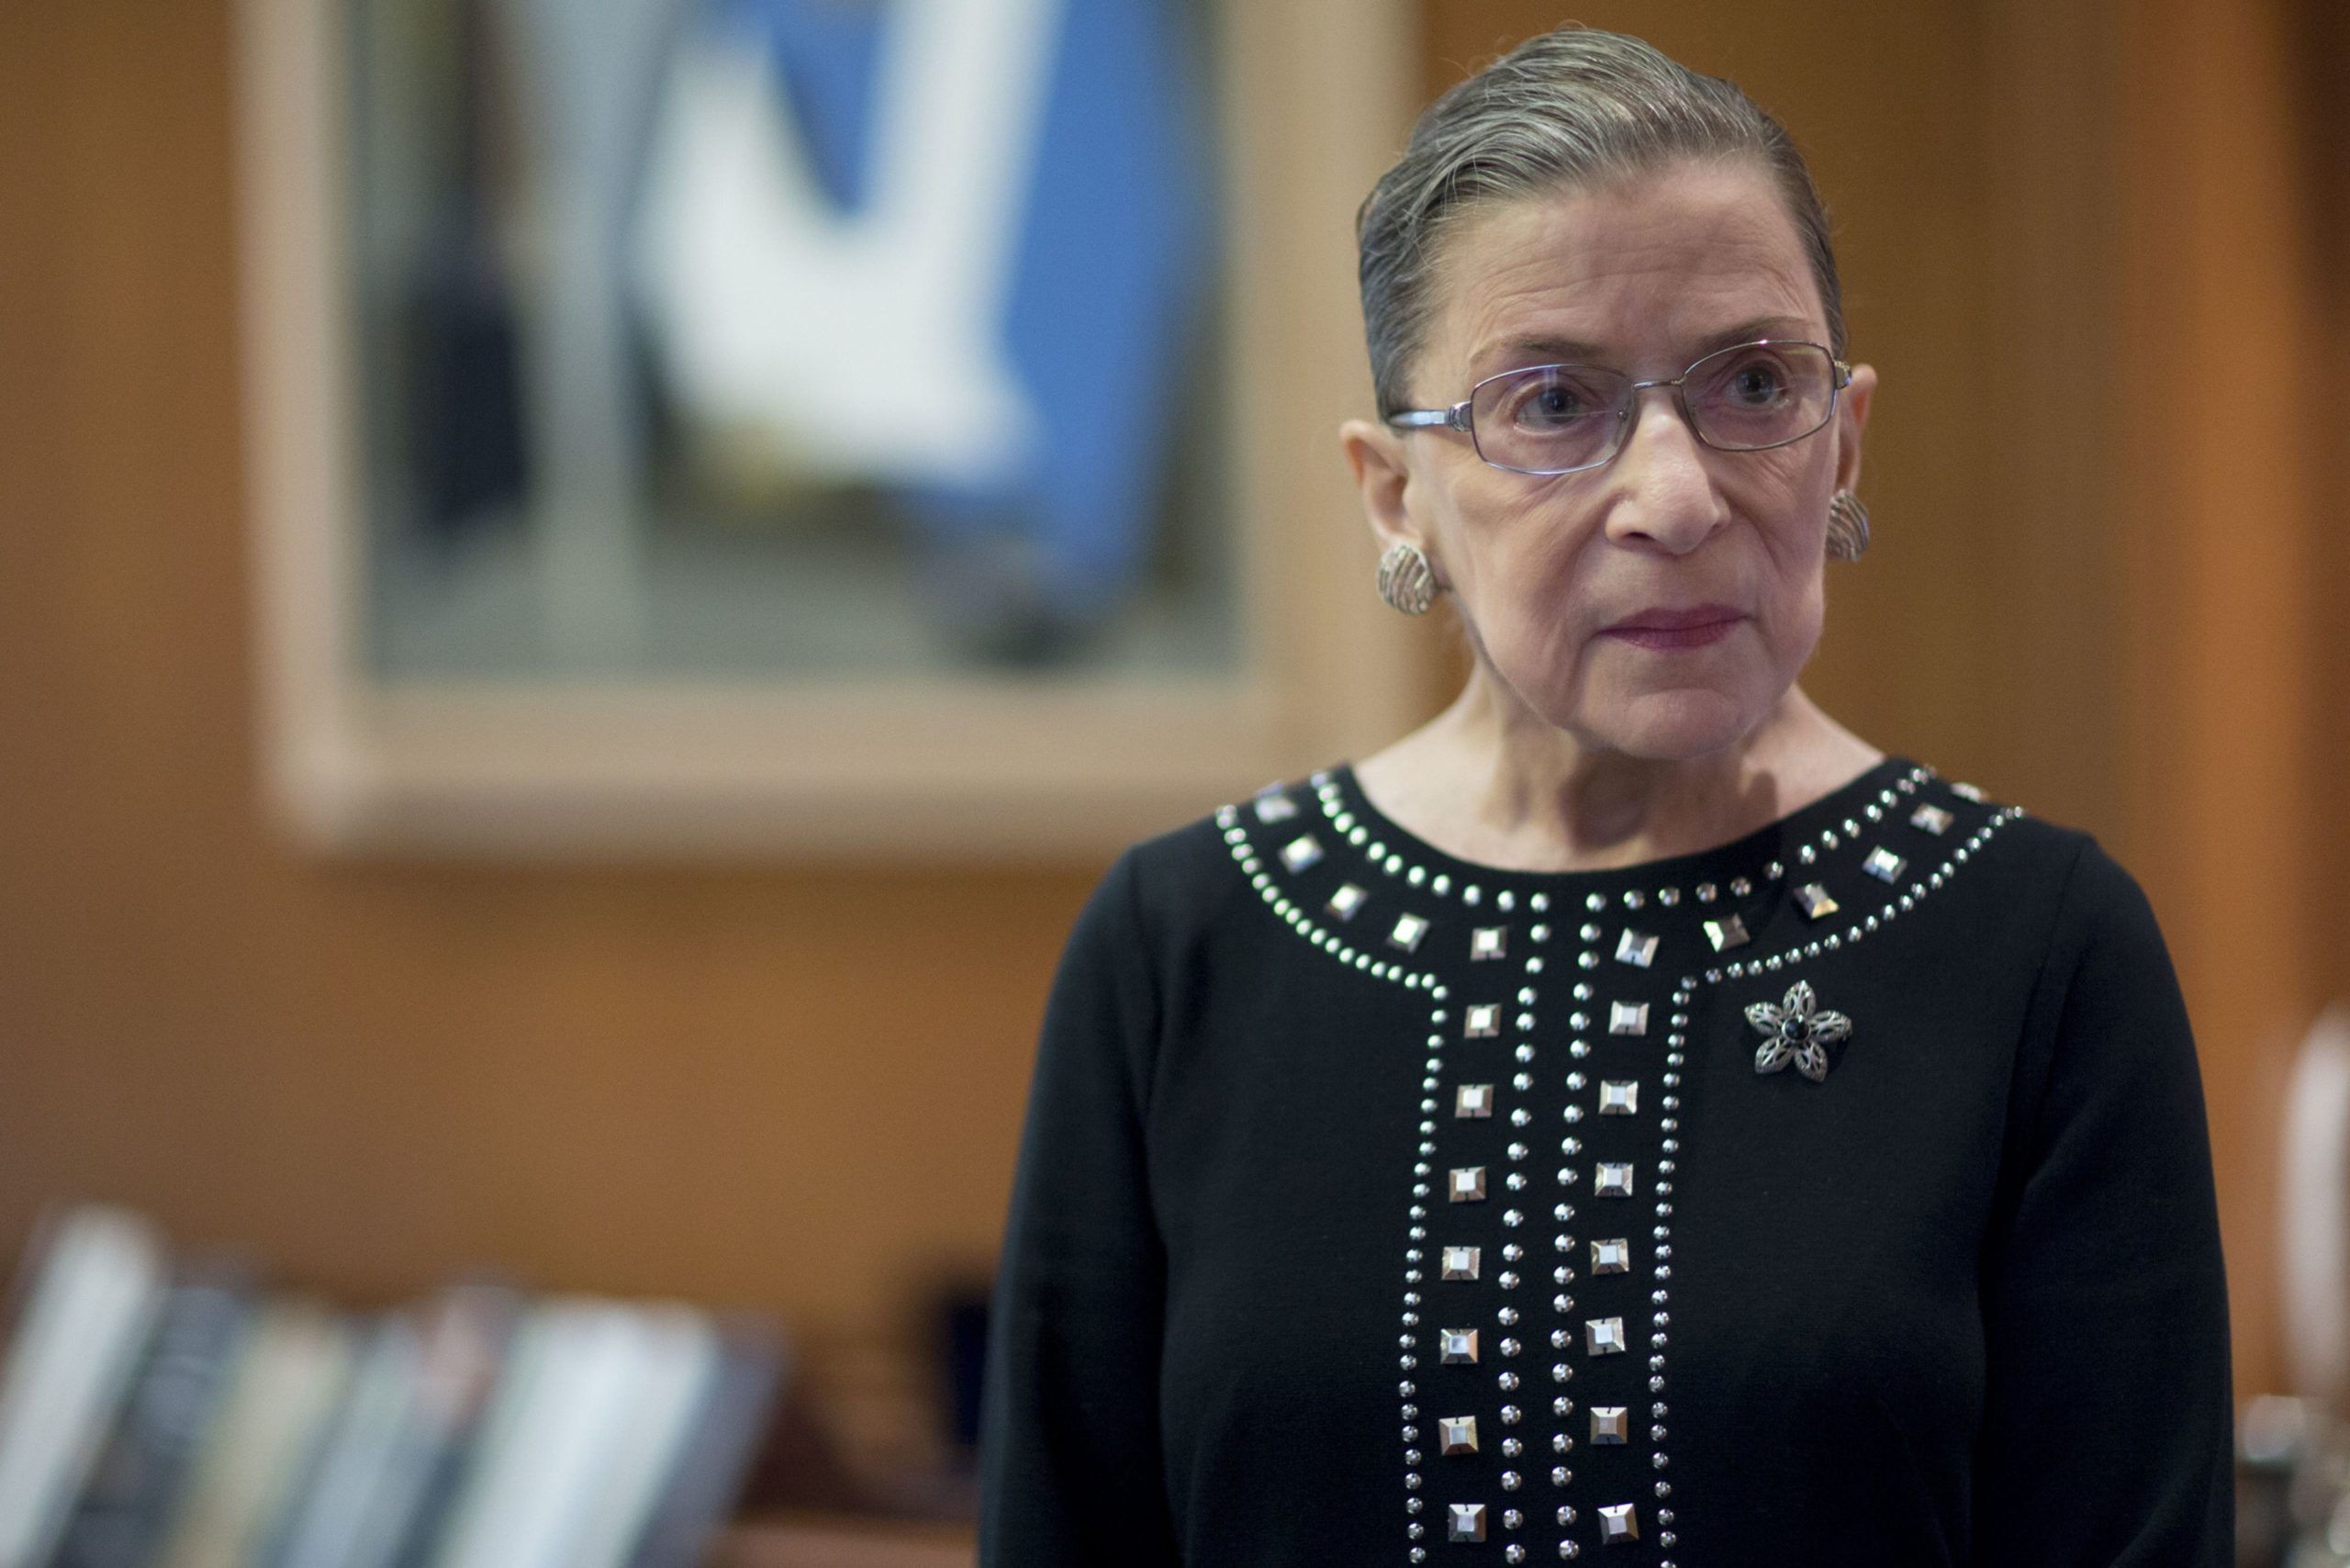 Ruth Bader Ginsburg, associate justice of the U.S. Supreme Court, stands in her chambers following an interview in Washington, D.C., U.S. Ginsburg, 80, was the oldest member of the Supreme Court and appointed to the court in 1993 by Democratic President Bill Clinton, had said on several occasions that she wanted to match the longevity of Justice Louis Brandeis, who was 82 when he stepped down in 1939. 